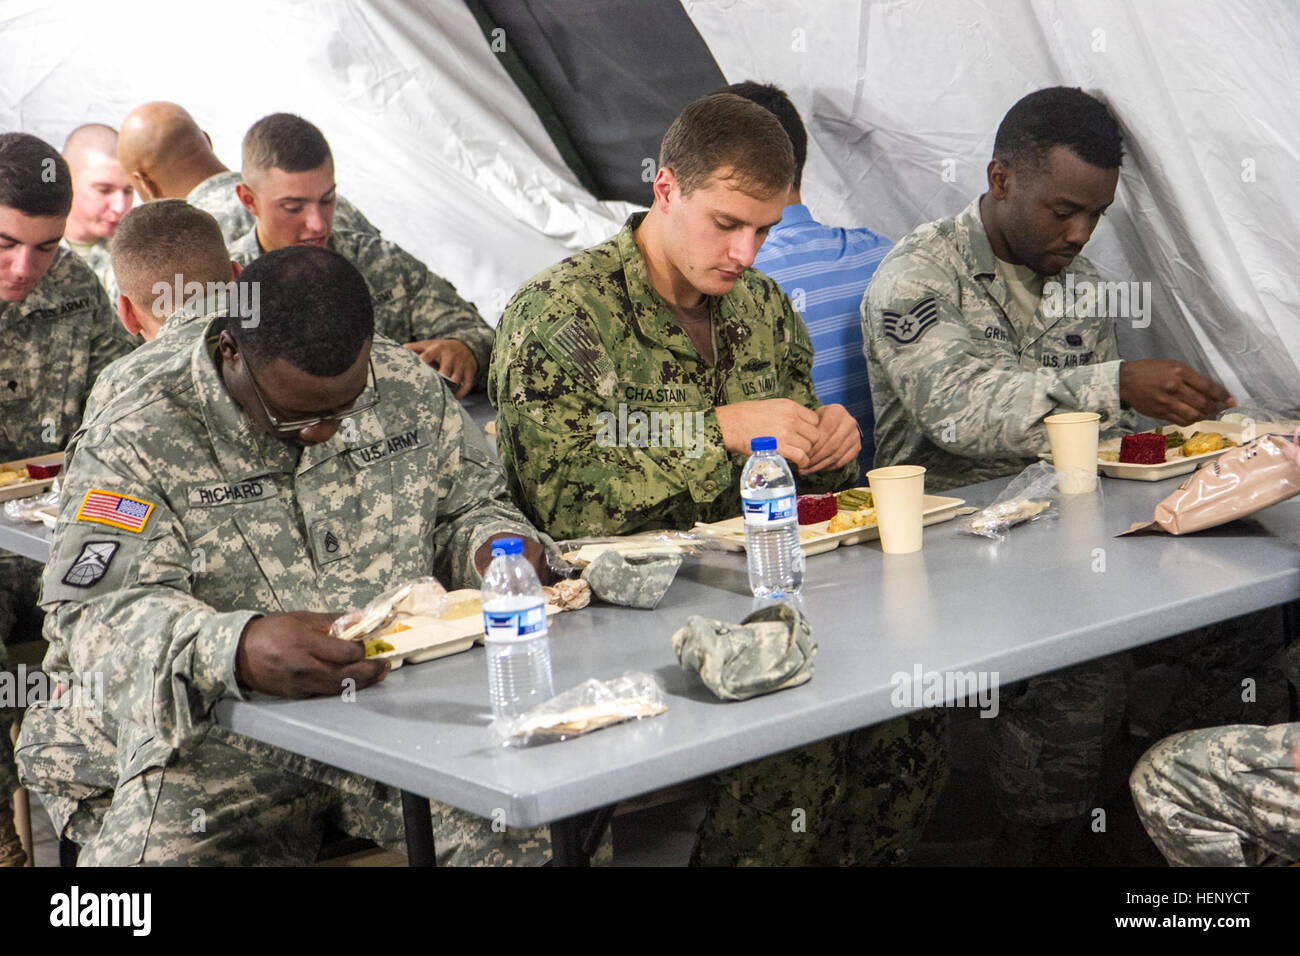 Service members partake in the first hot meal on Barclay Training Center Nov. 9, 2014, since arriving more than three weeks ago. The meal consisted of chicken potpie, a wheat biscuit, green beans, red velvet cake and grape juice. United Assistance is a Department of Defense operation to provide logistics, training and engineering support to U.S. Agency for International Development-led efforts to contain the Ebola virus outbreak in West African nations. (U.S. Army photo by Staff Sgt. Terrance D. Rhodes, Joint Forces Command – United Assistance Public Affairs/RELEASED) Service members in Liberi Stock Photo